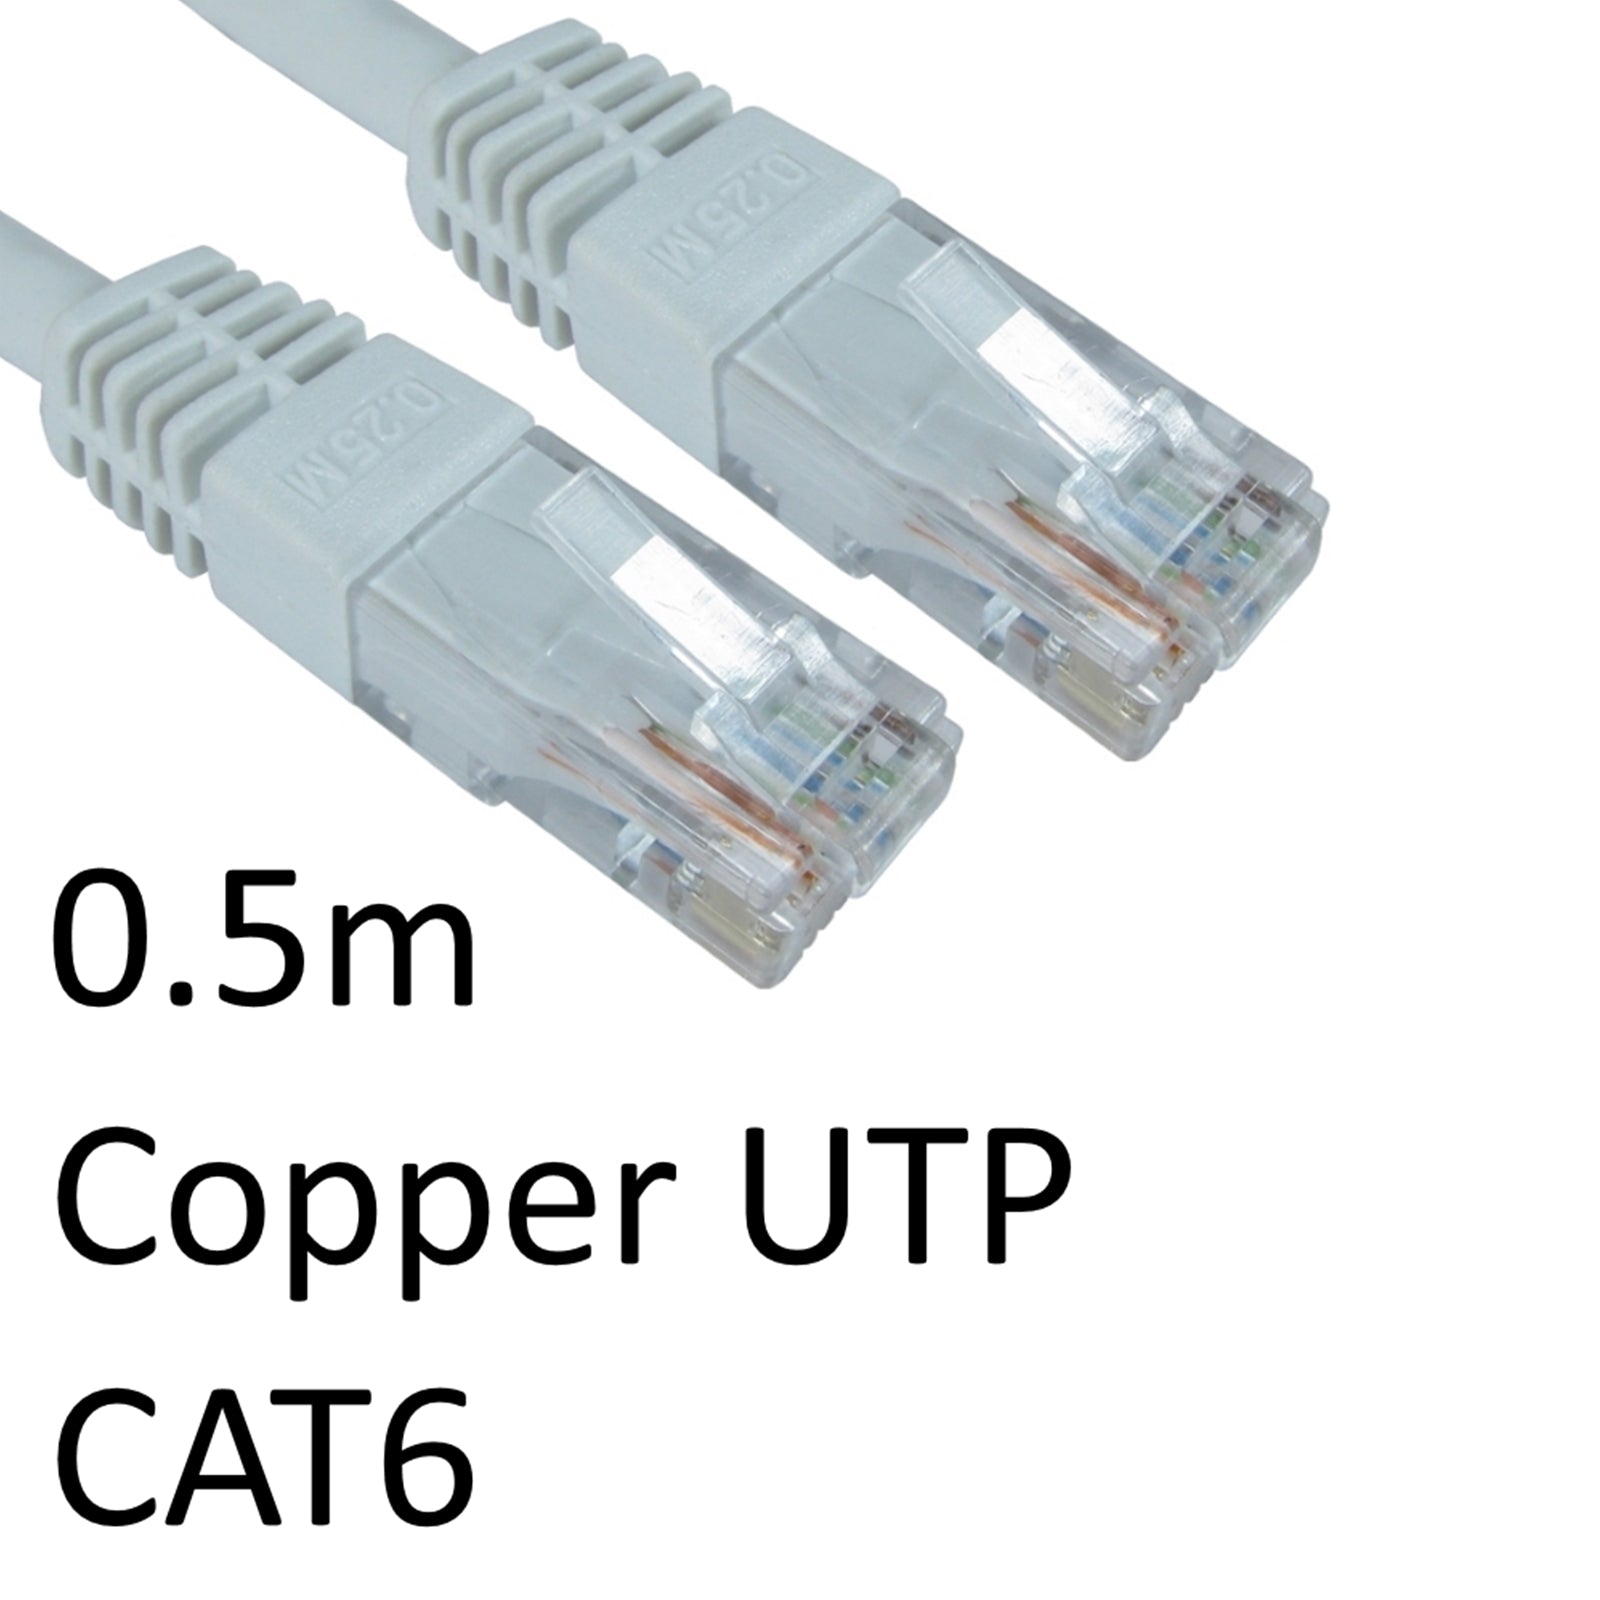 CAT6 RJ45 (M) to RJ45 (M) 0.5m OEM Moulded Boot Copper UTP Network Cable - White